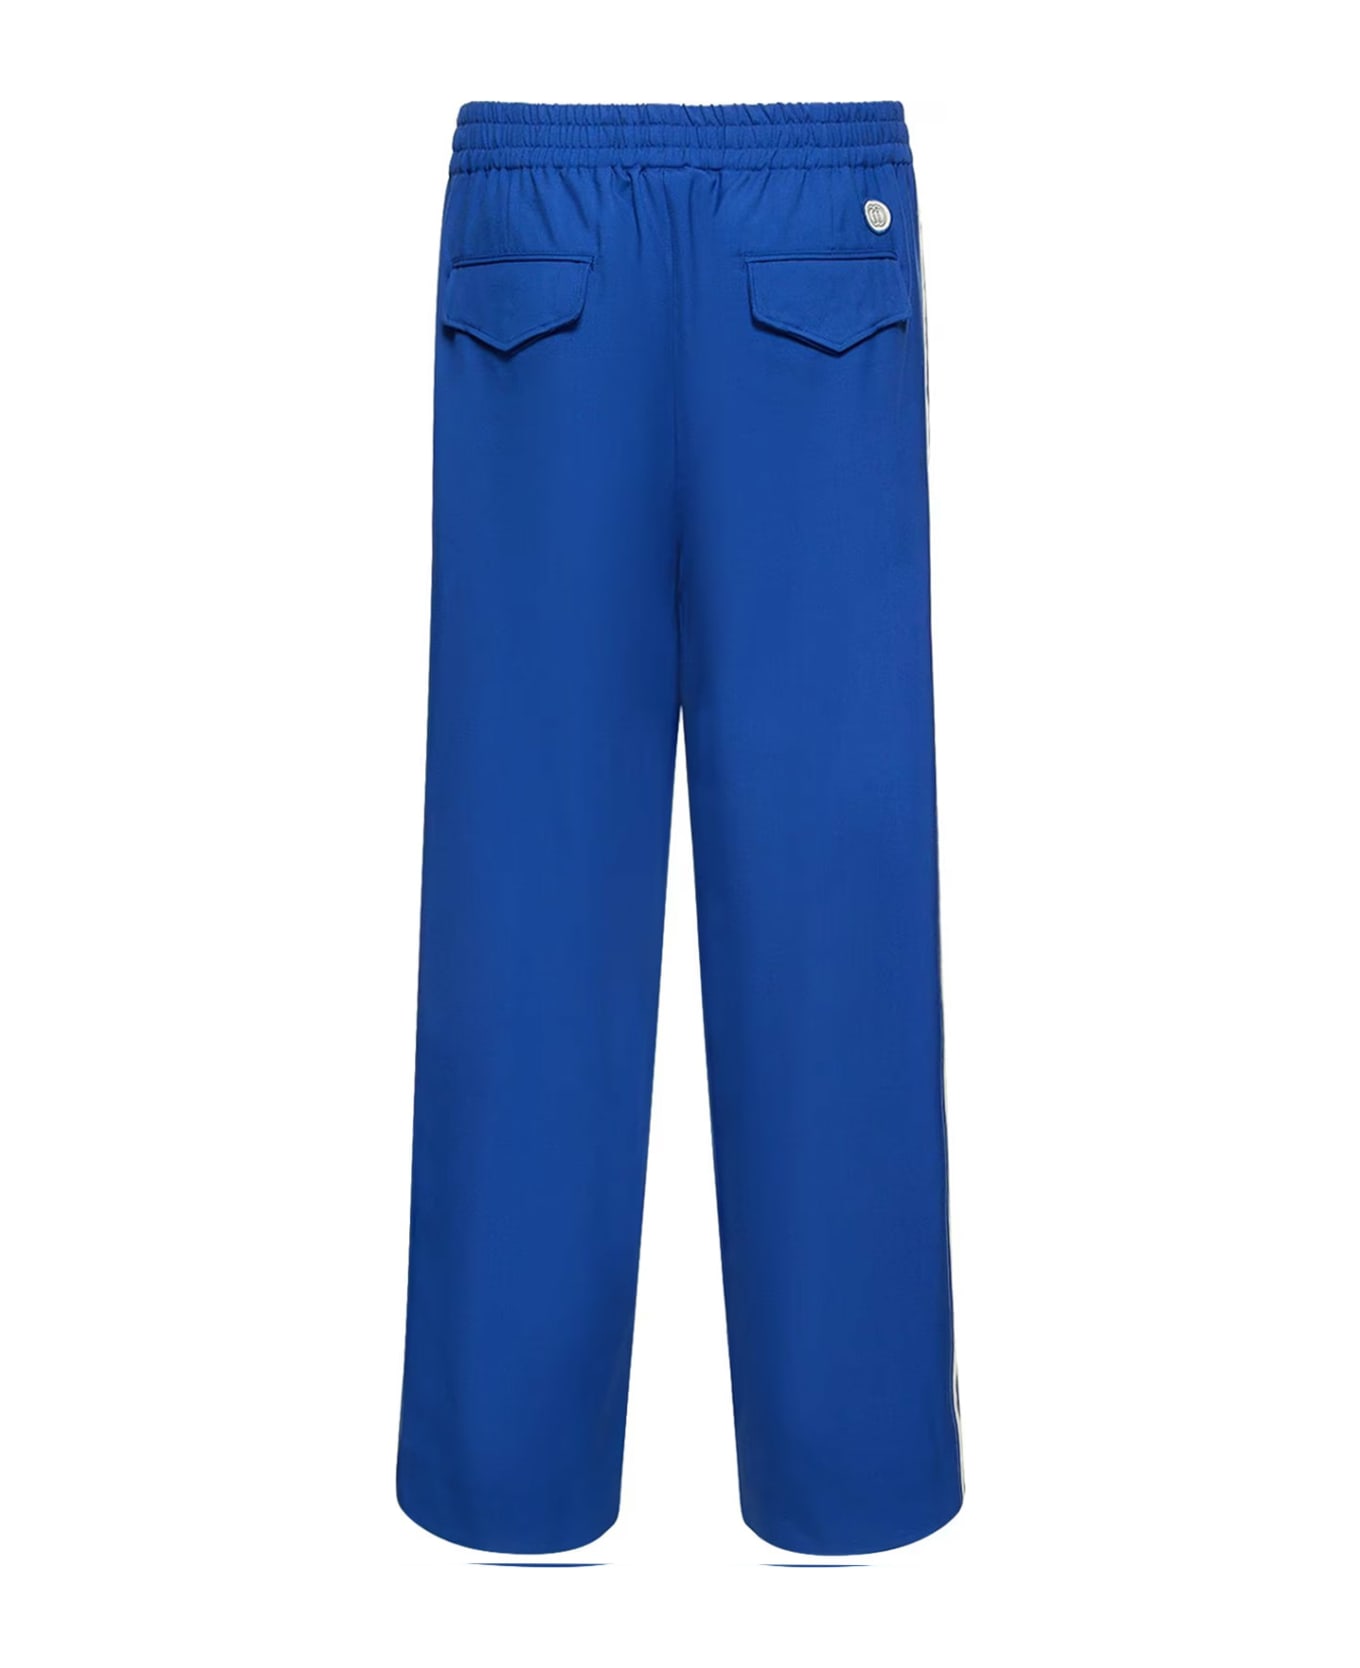 Gucci Trouser - Blue ボトムス